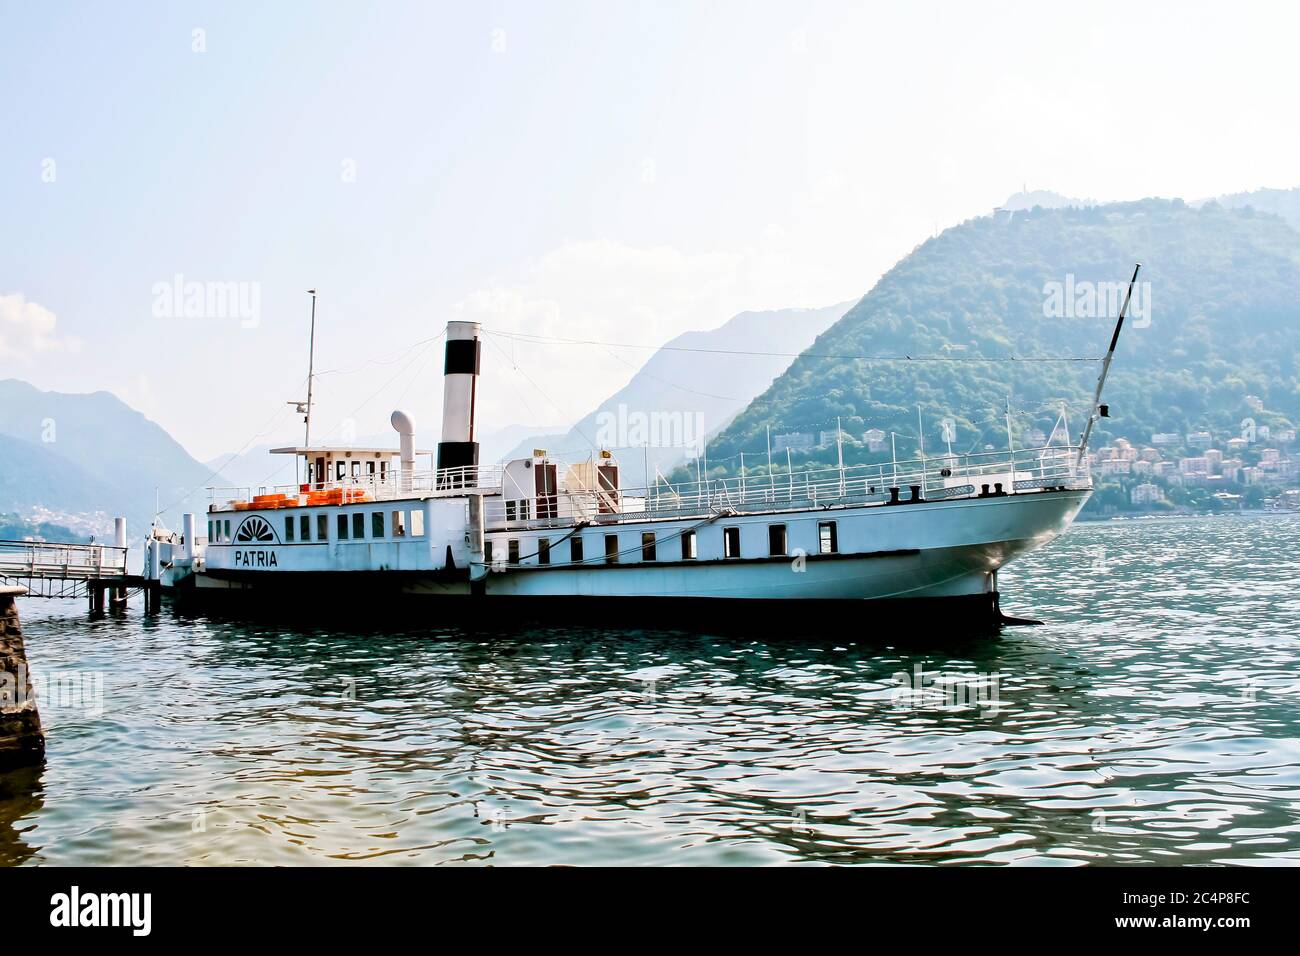 Como, Lombardy, Italy. Lake of Como. 'Patria' steamer. Historic boat of Lake Como, launched in 1926 recently renovated by the Province of Como. On board information panels with the history of the steamer and its recovery. Possibility of use as a location for prestigious events. Stock Photo